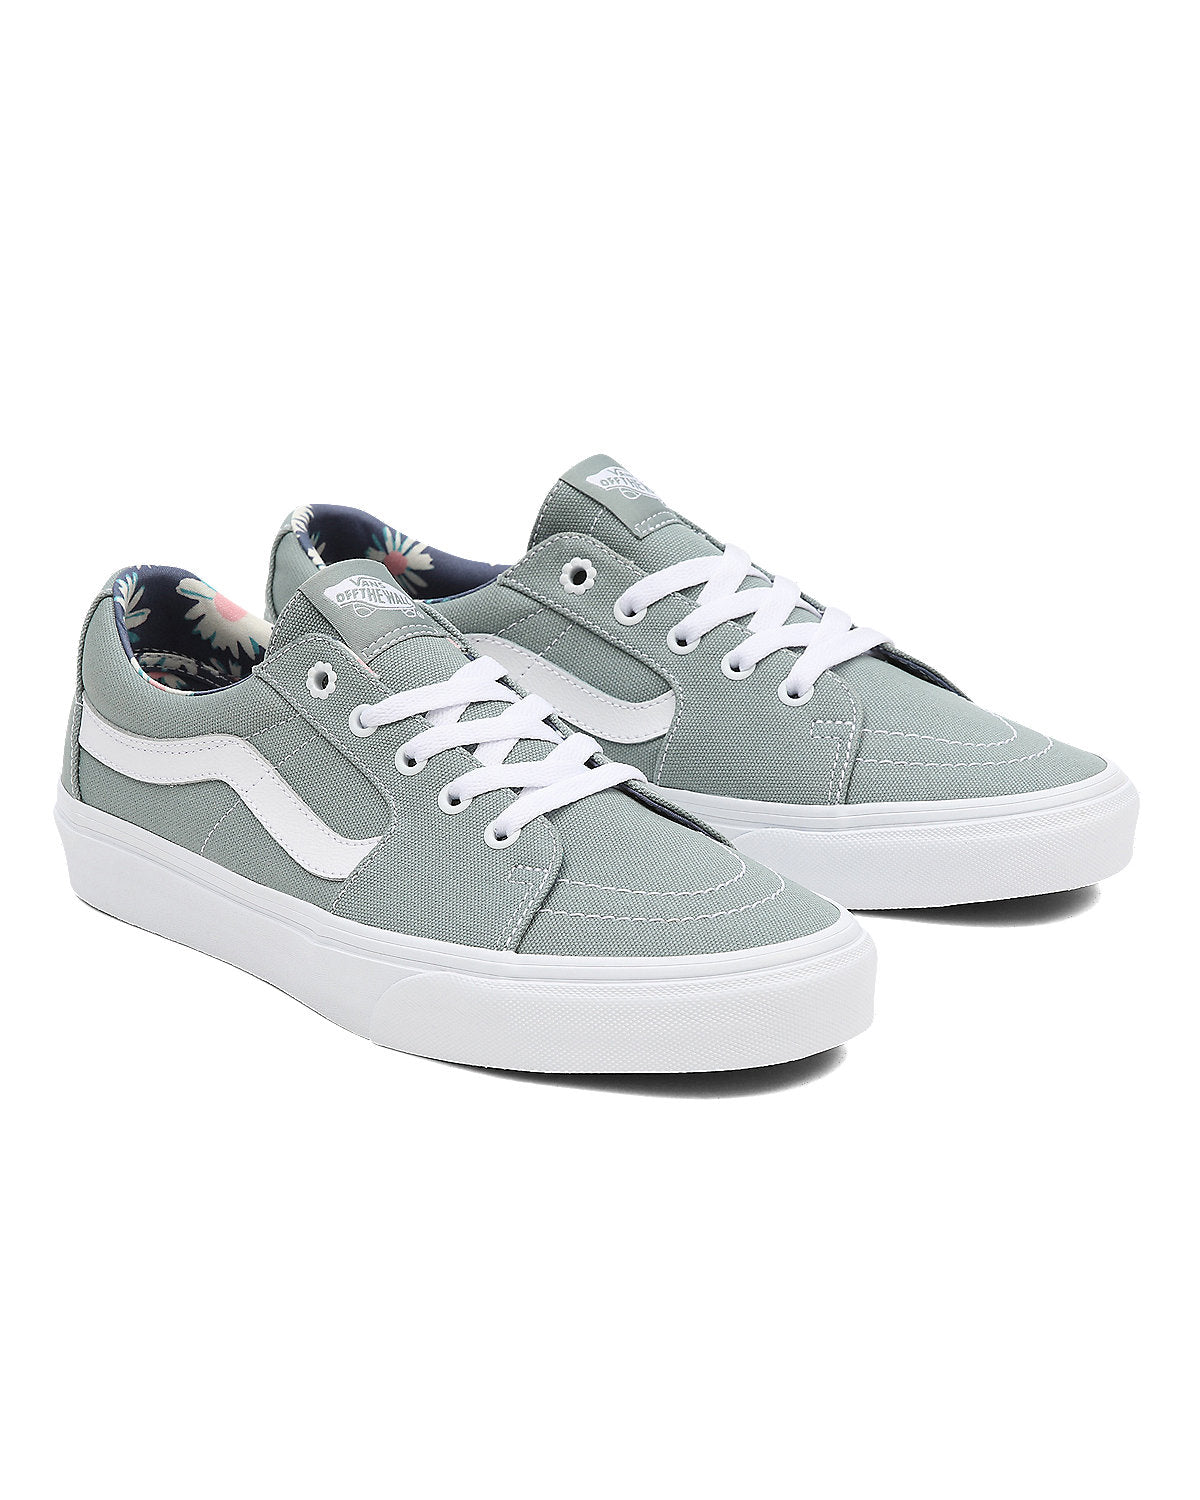 VANS Unisex Sk8-Low Smell The Flowers Trainers - Green